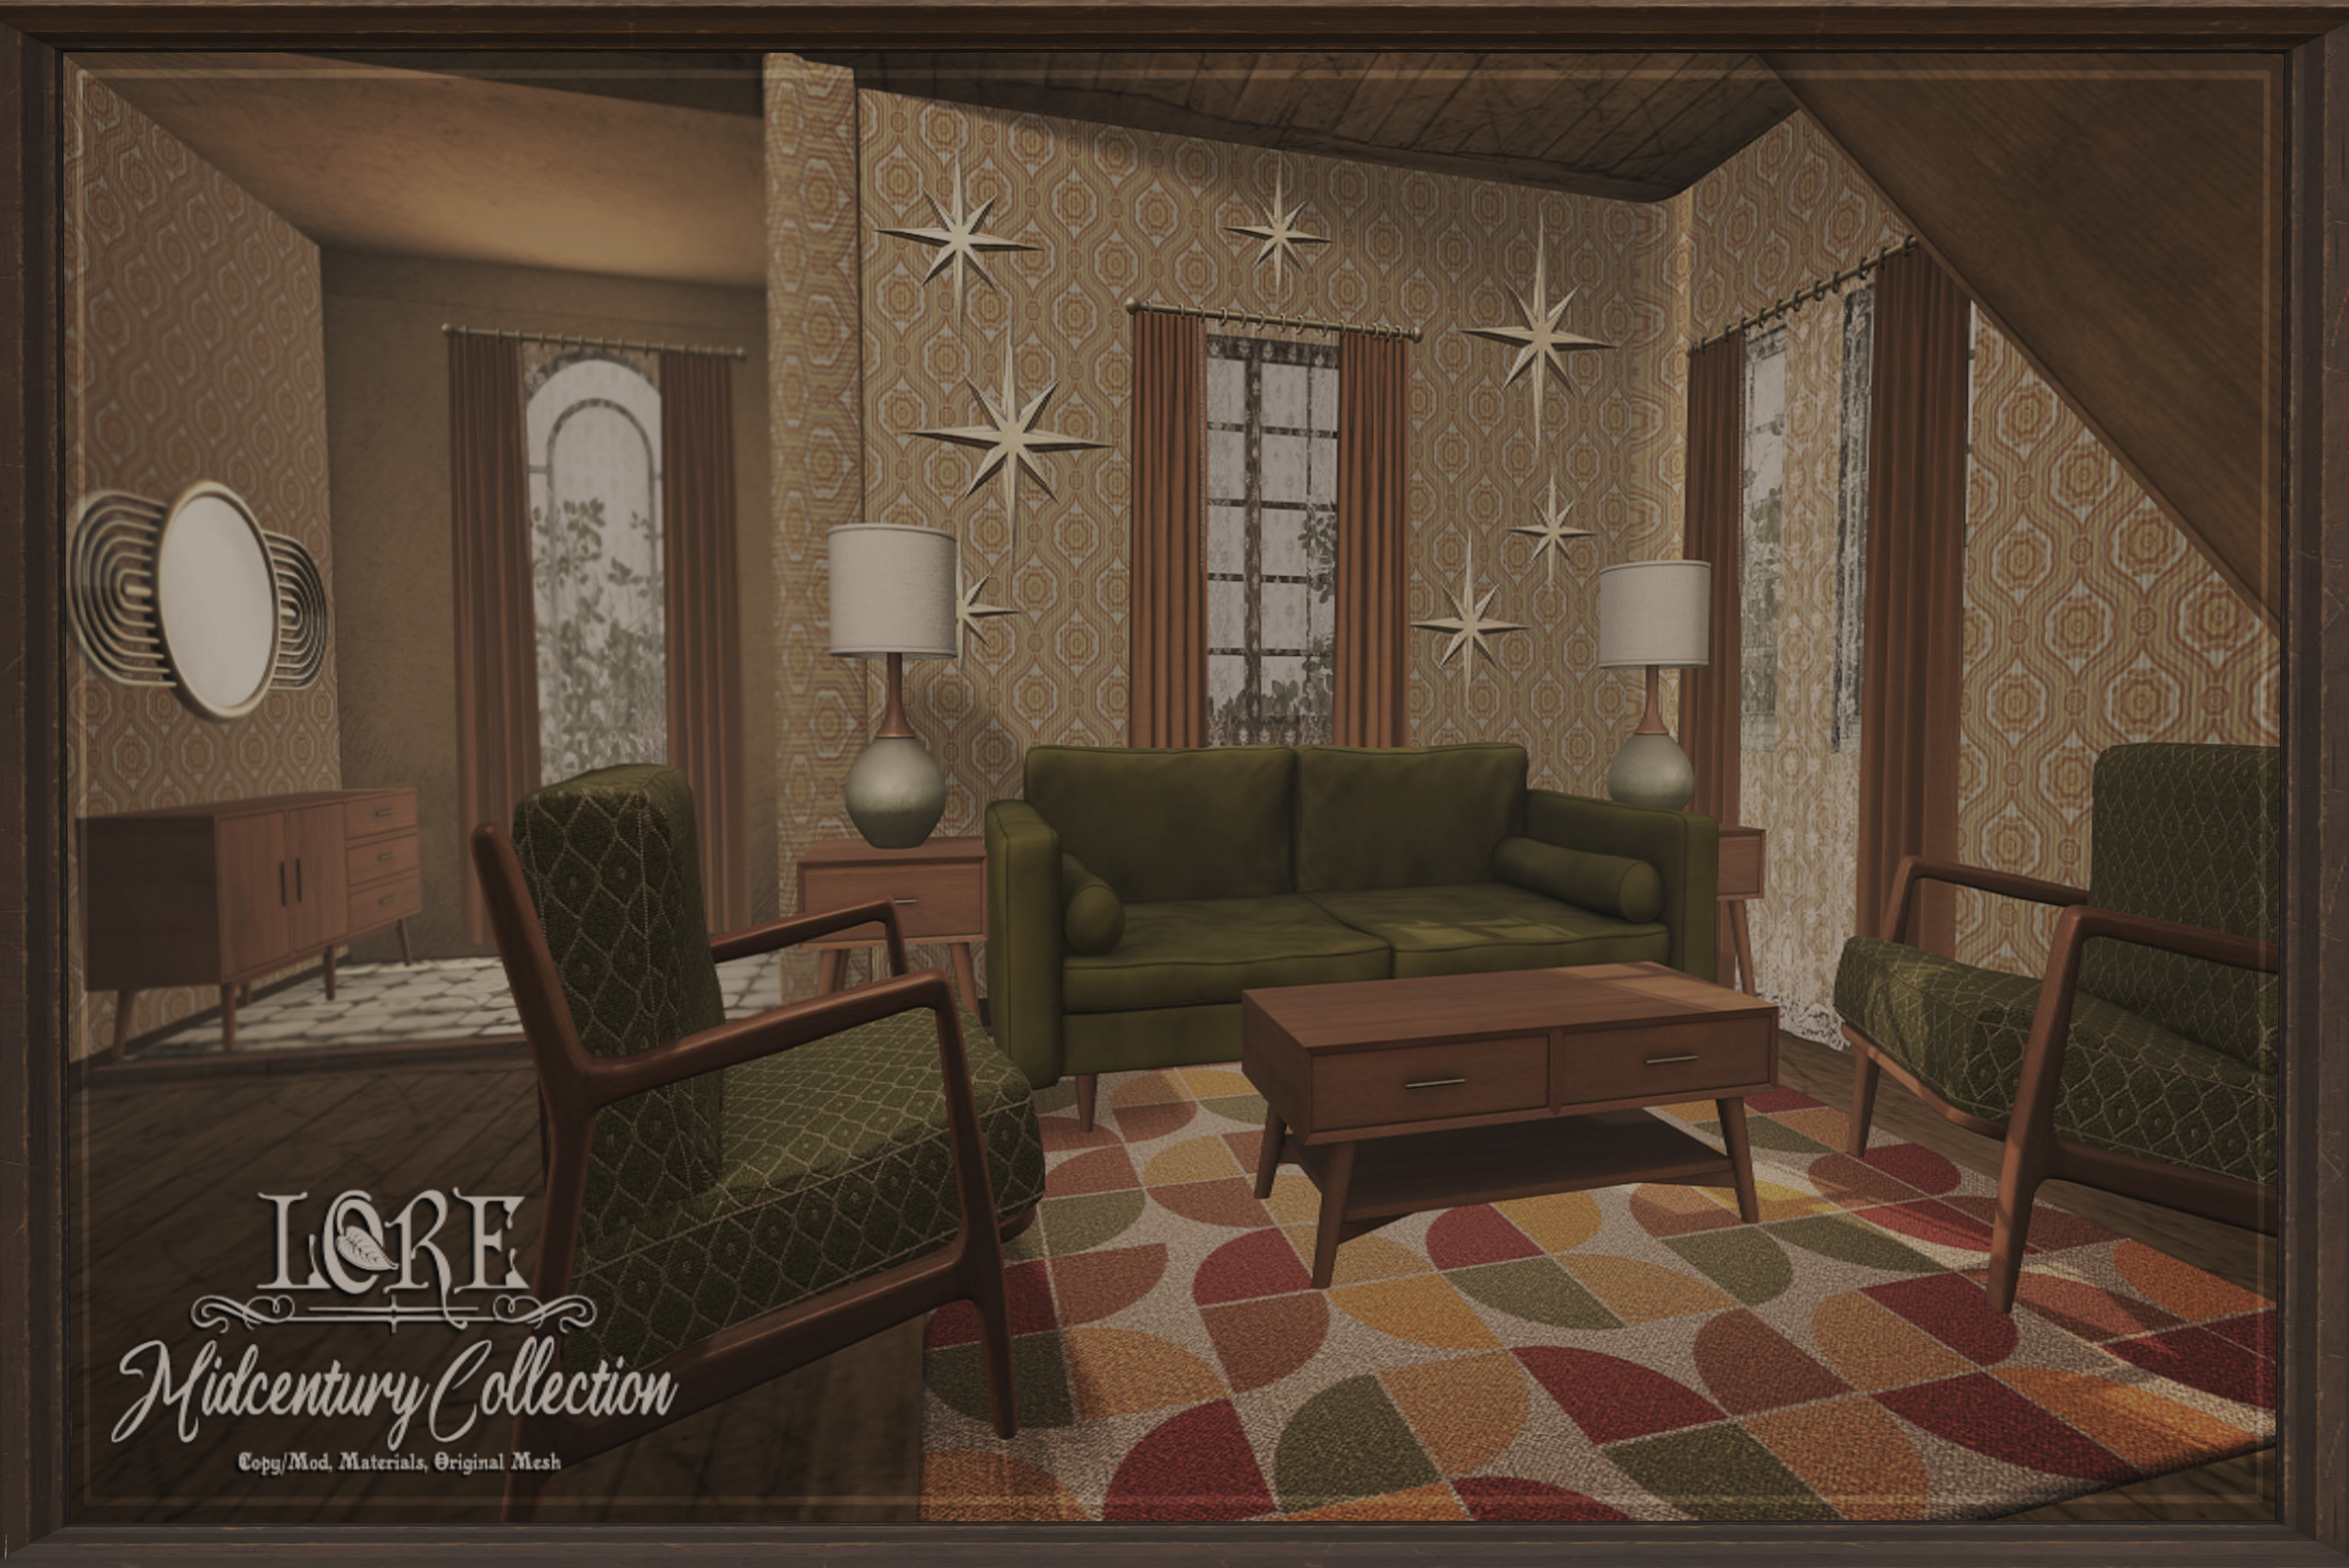 Lore – Midcentury Collection